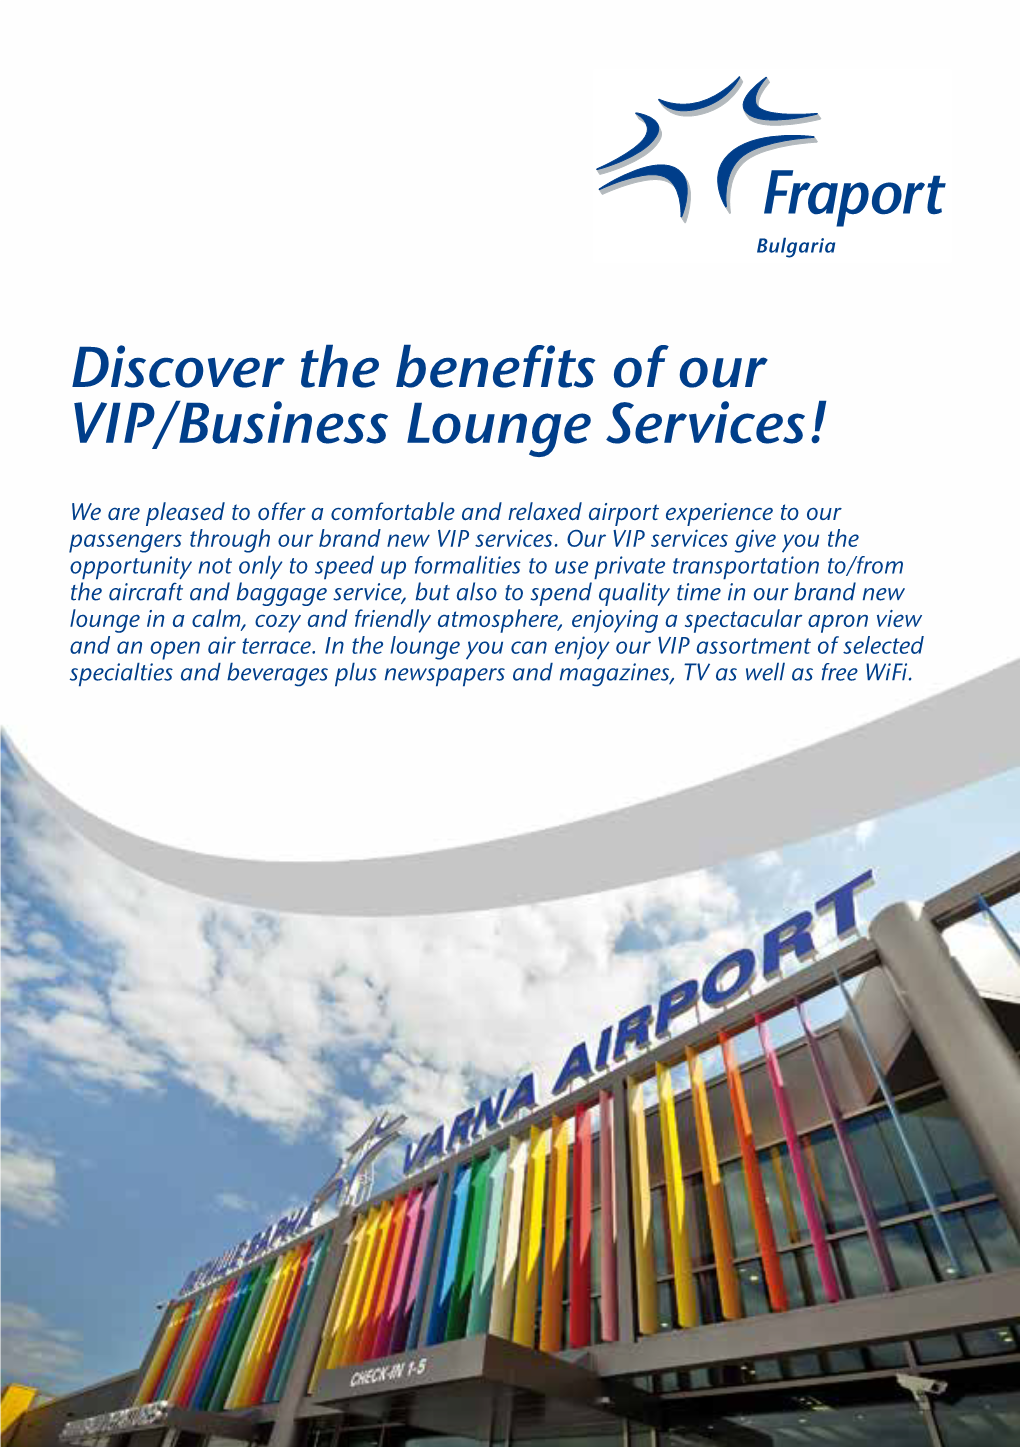 Discover the Benefits of Our VIP/Business Lounge Services!